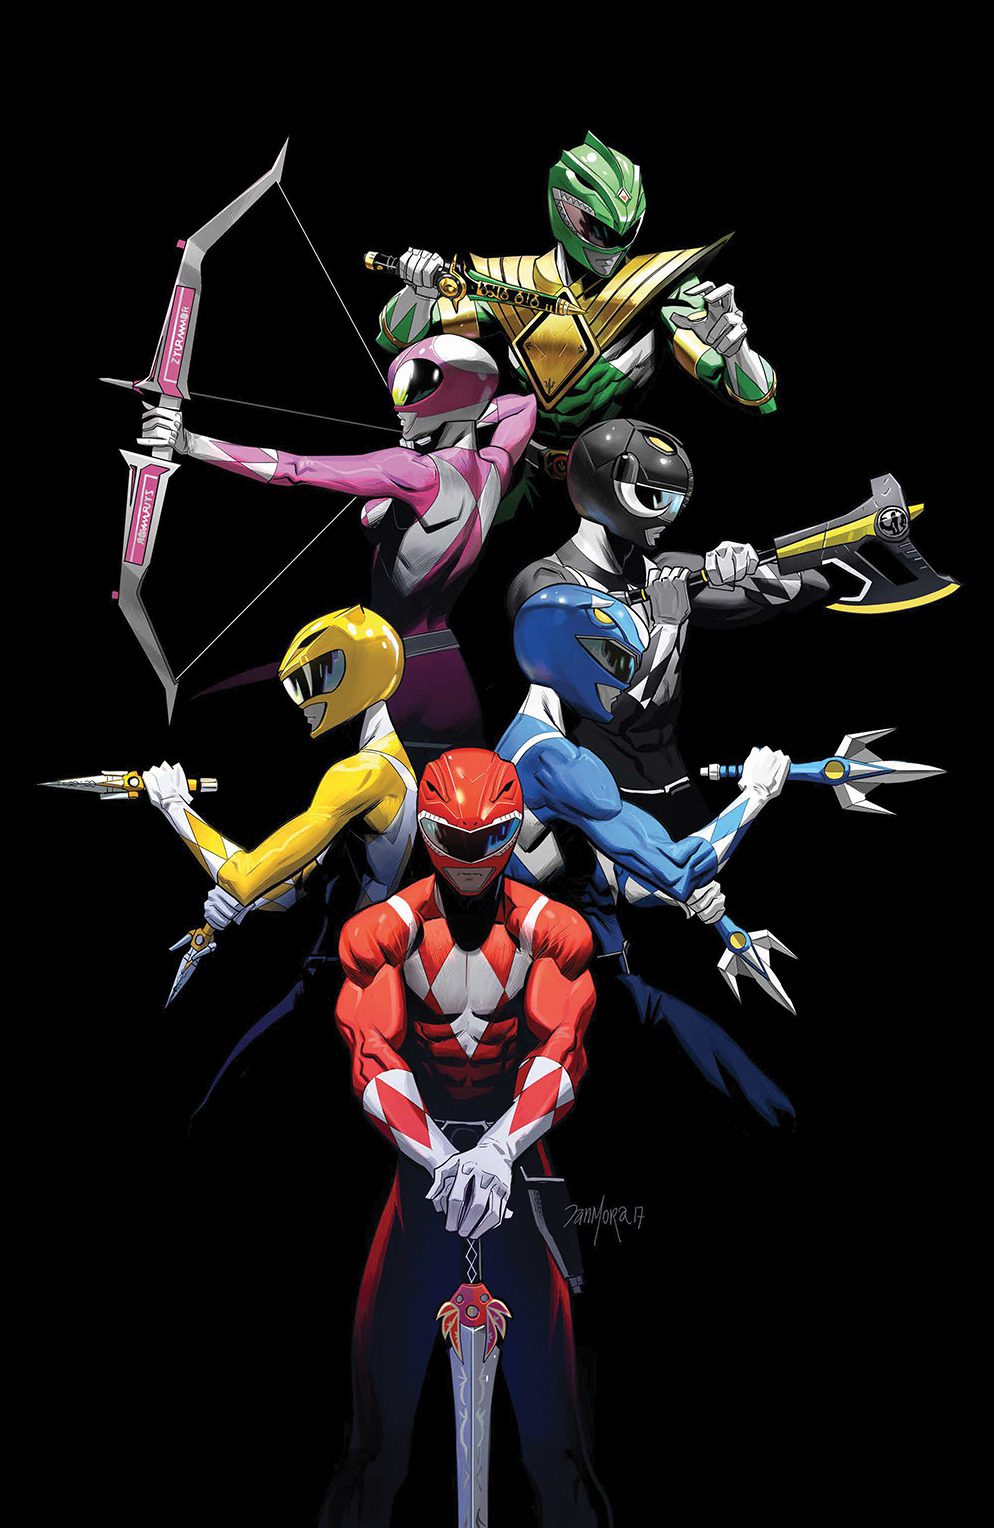 Mighty Morphin Power Rangers Annual #1 REVIEW